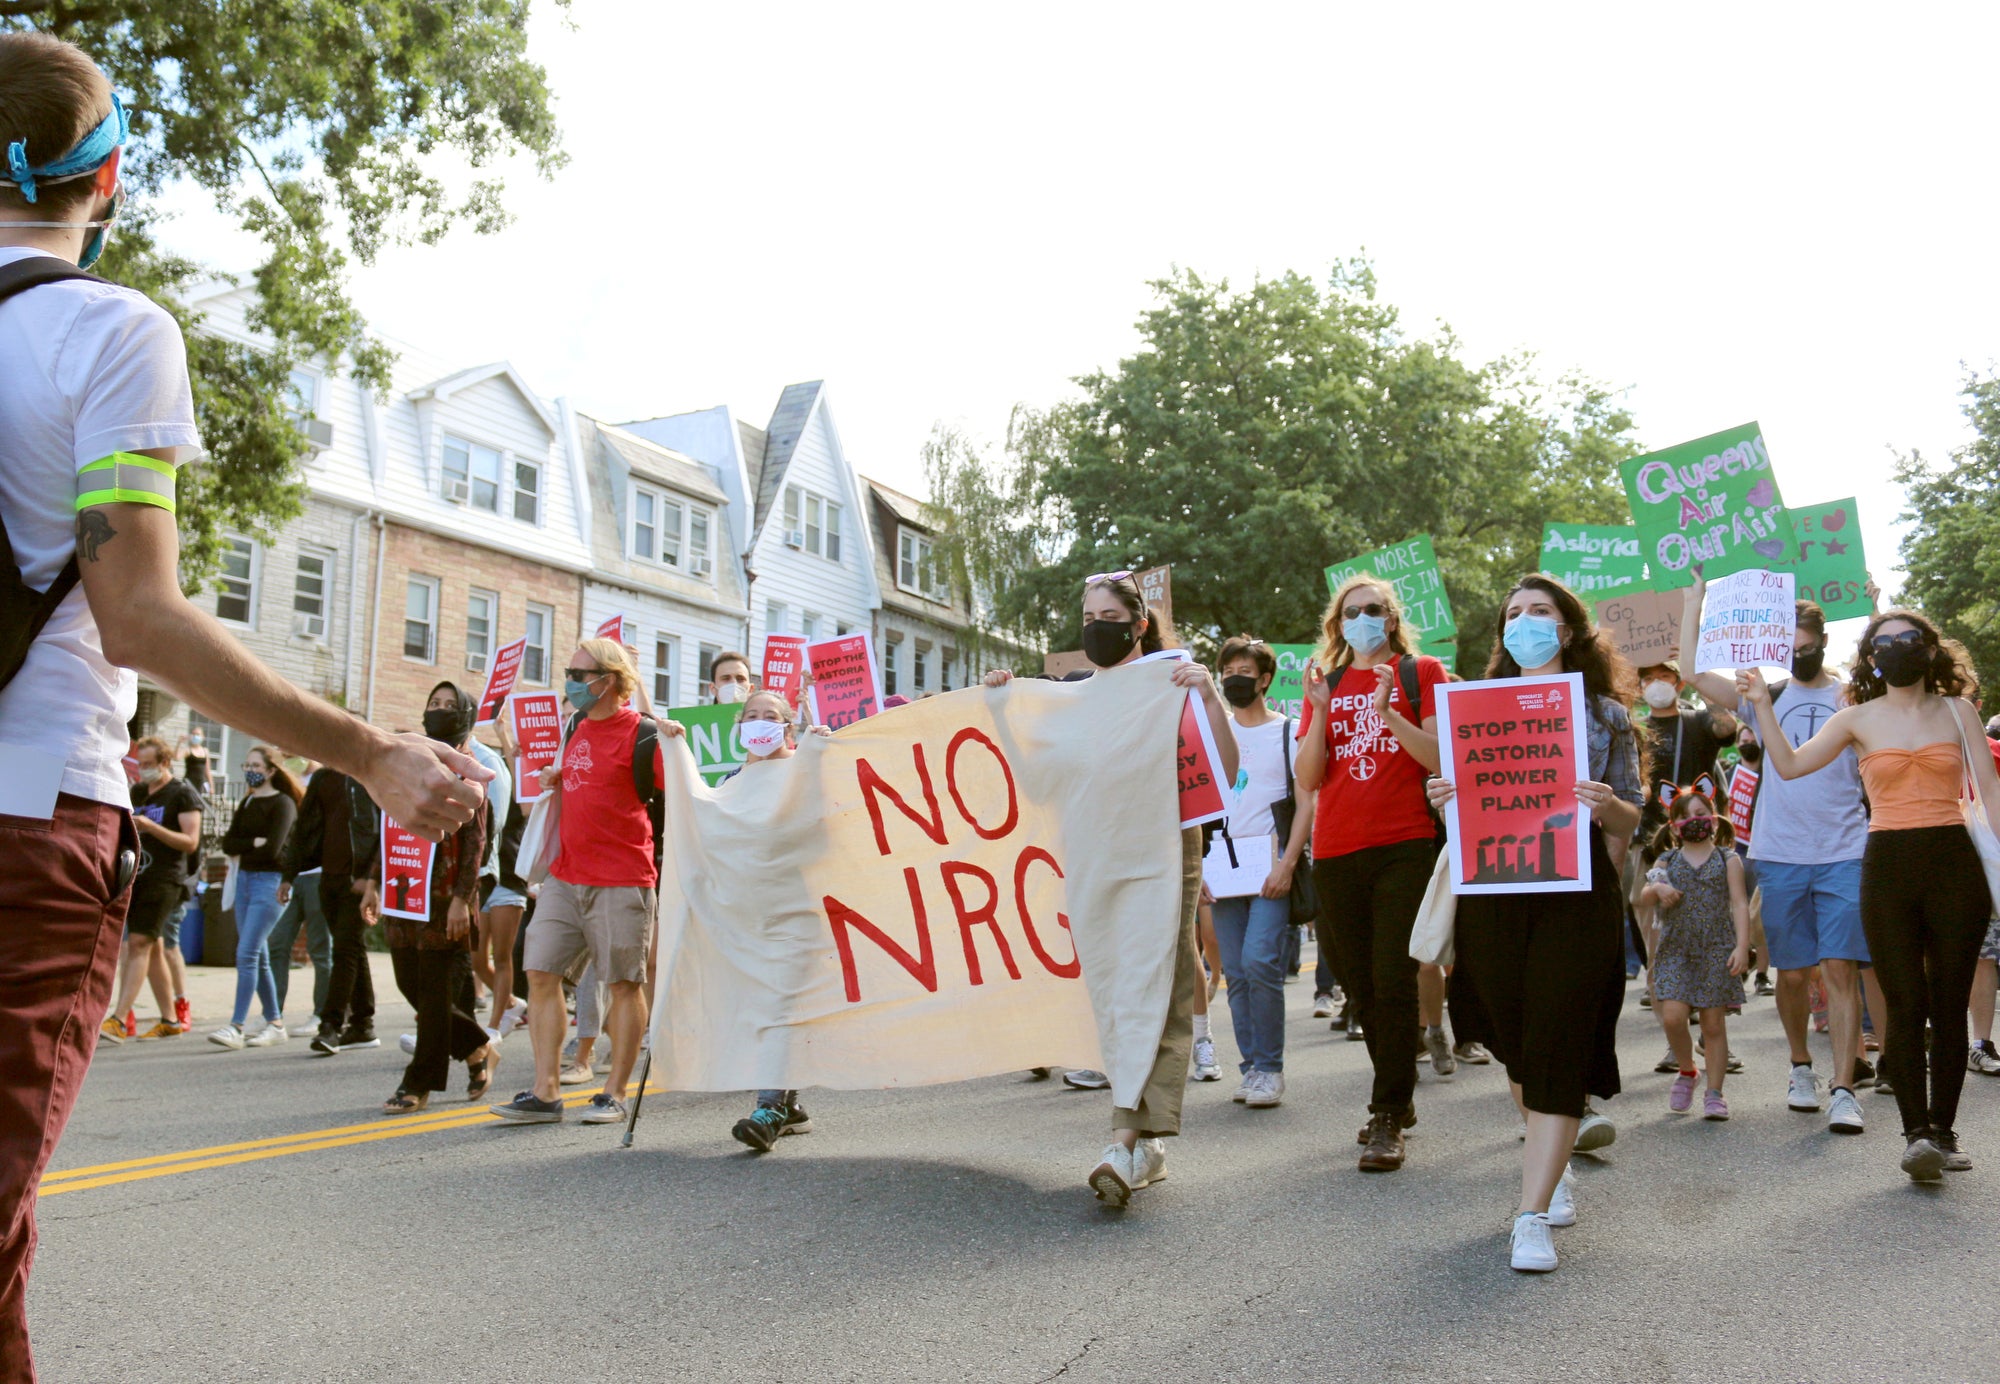 Activists march through Queens, New York, protesting NRG Energy’s proposed gas-fired power plant.